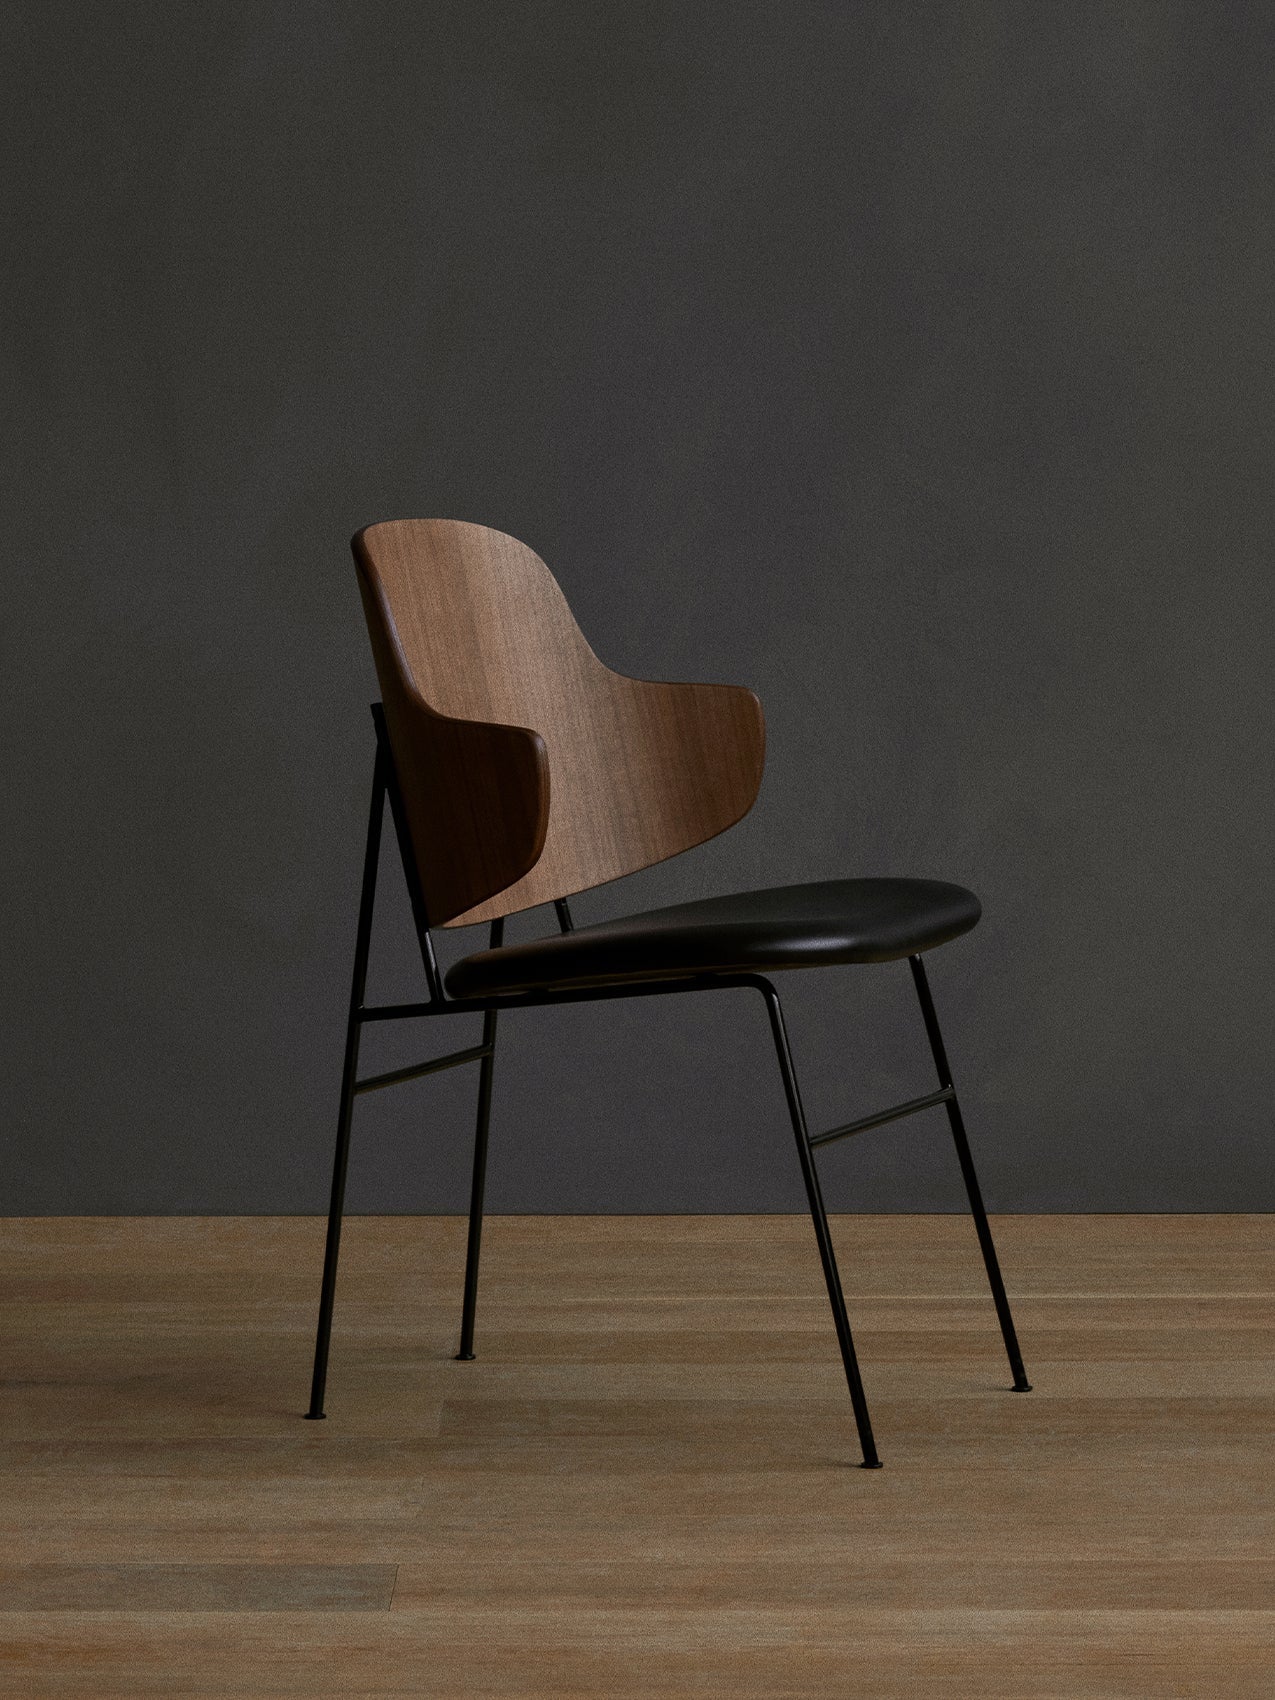 The Penguin Dining Chair